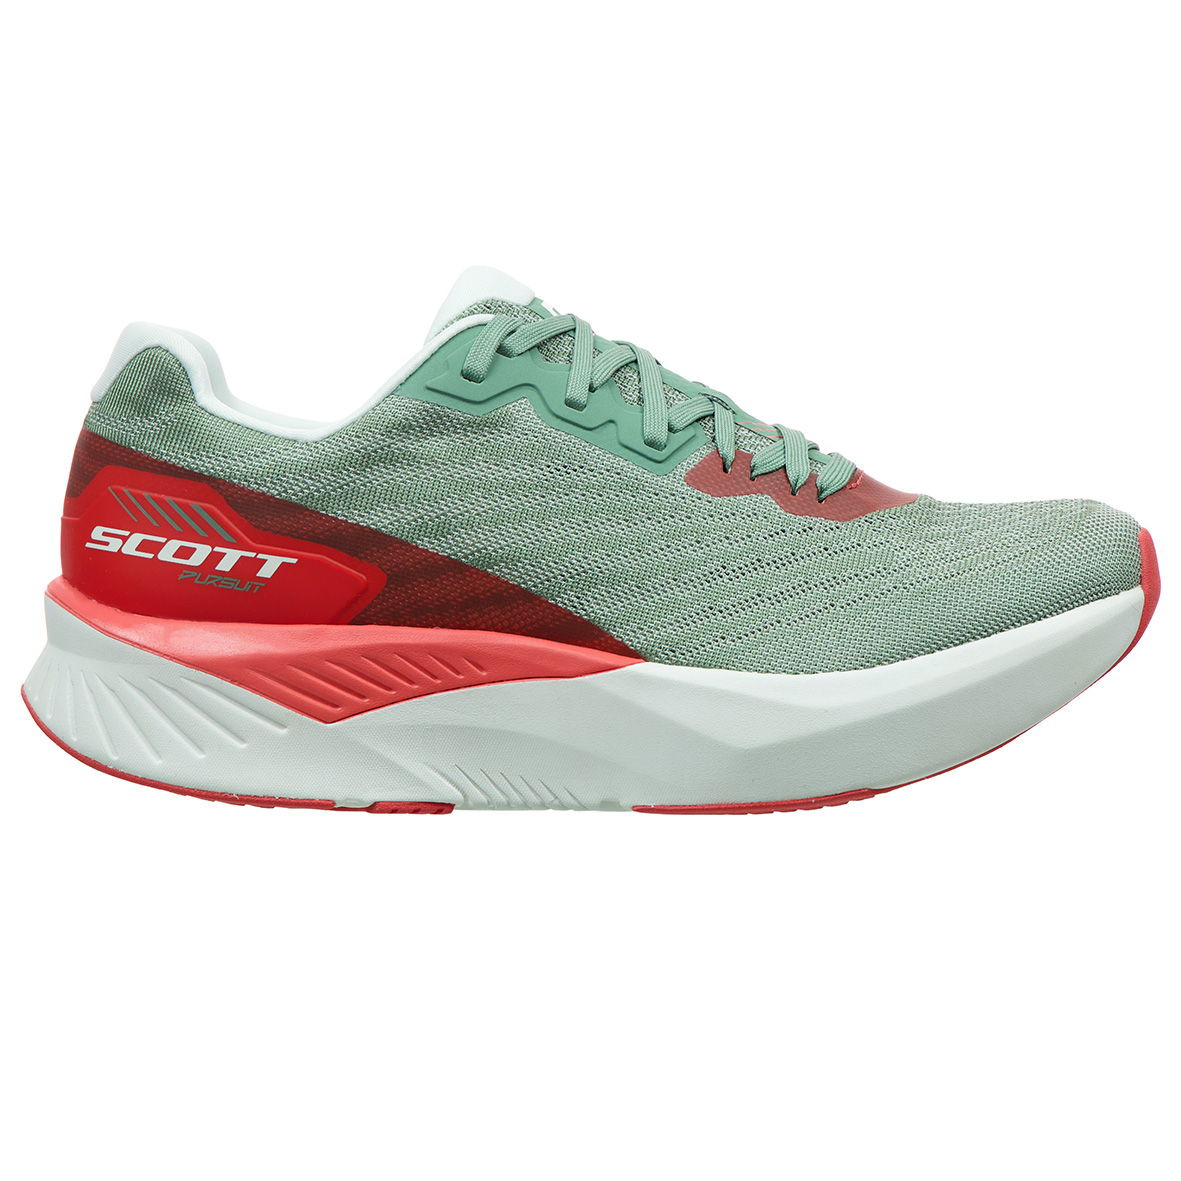 RUNNING SHOES SCOTT WS PURSUIT, FROST GREEN-CORAL PINK WOMAN.